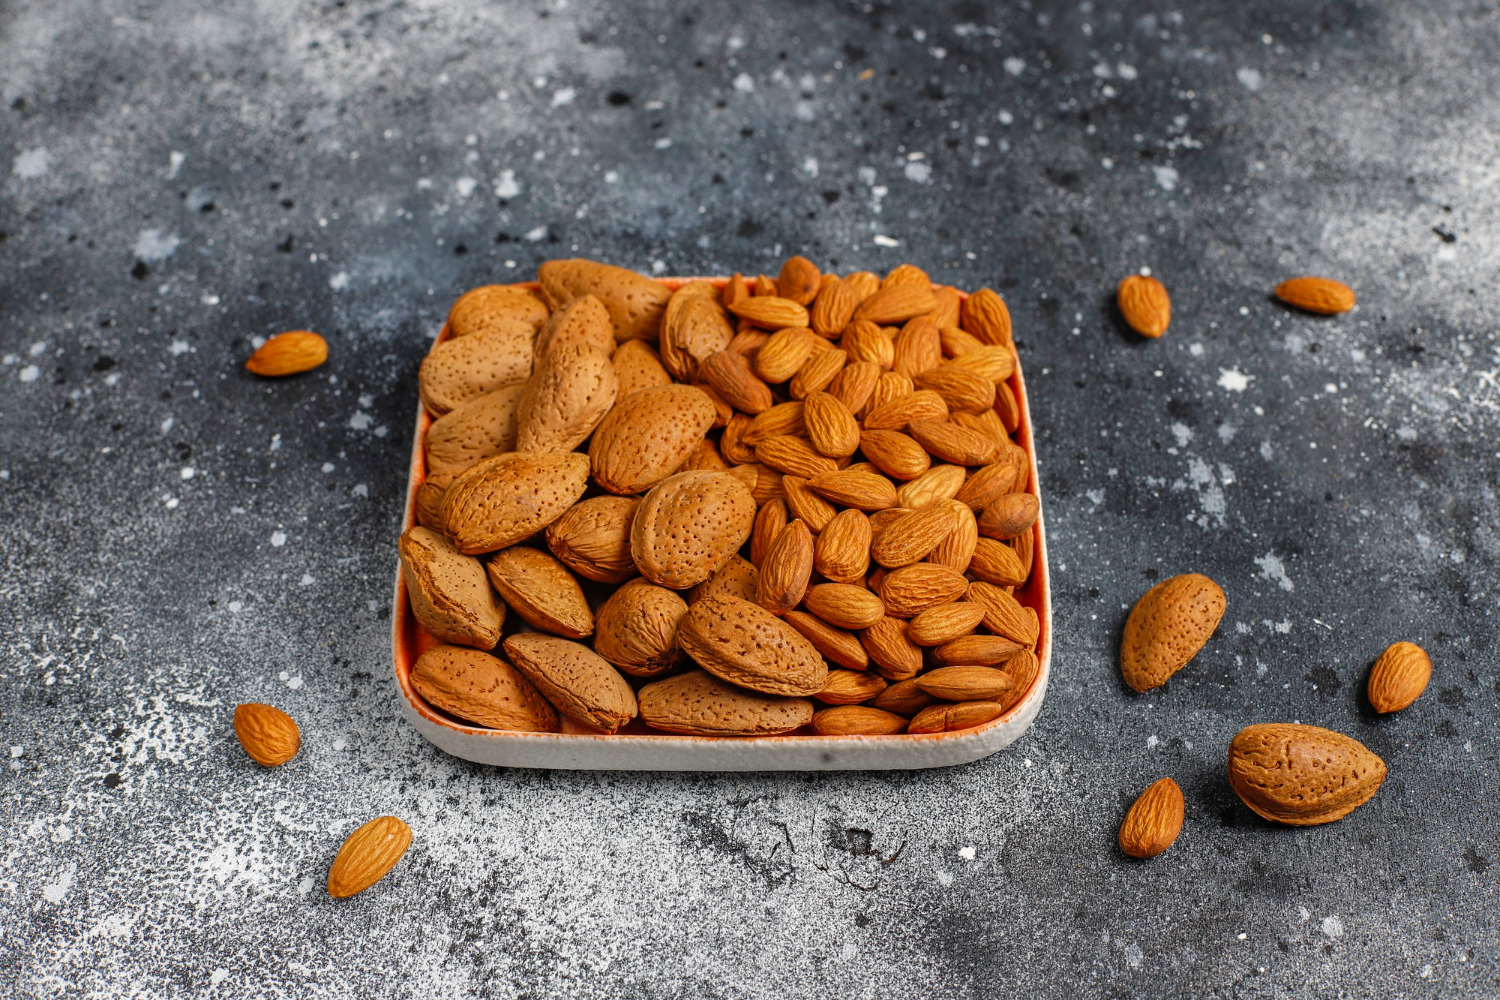 Almonds Supplier: The Role of Quality Assurance in Supply